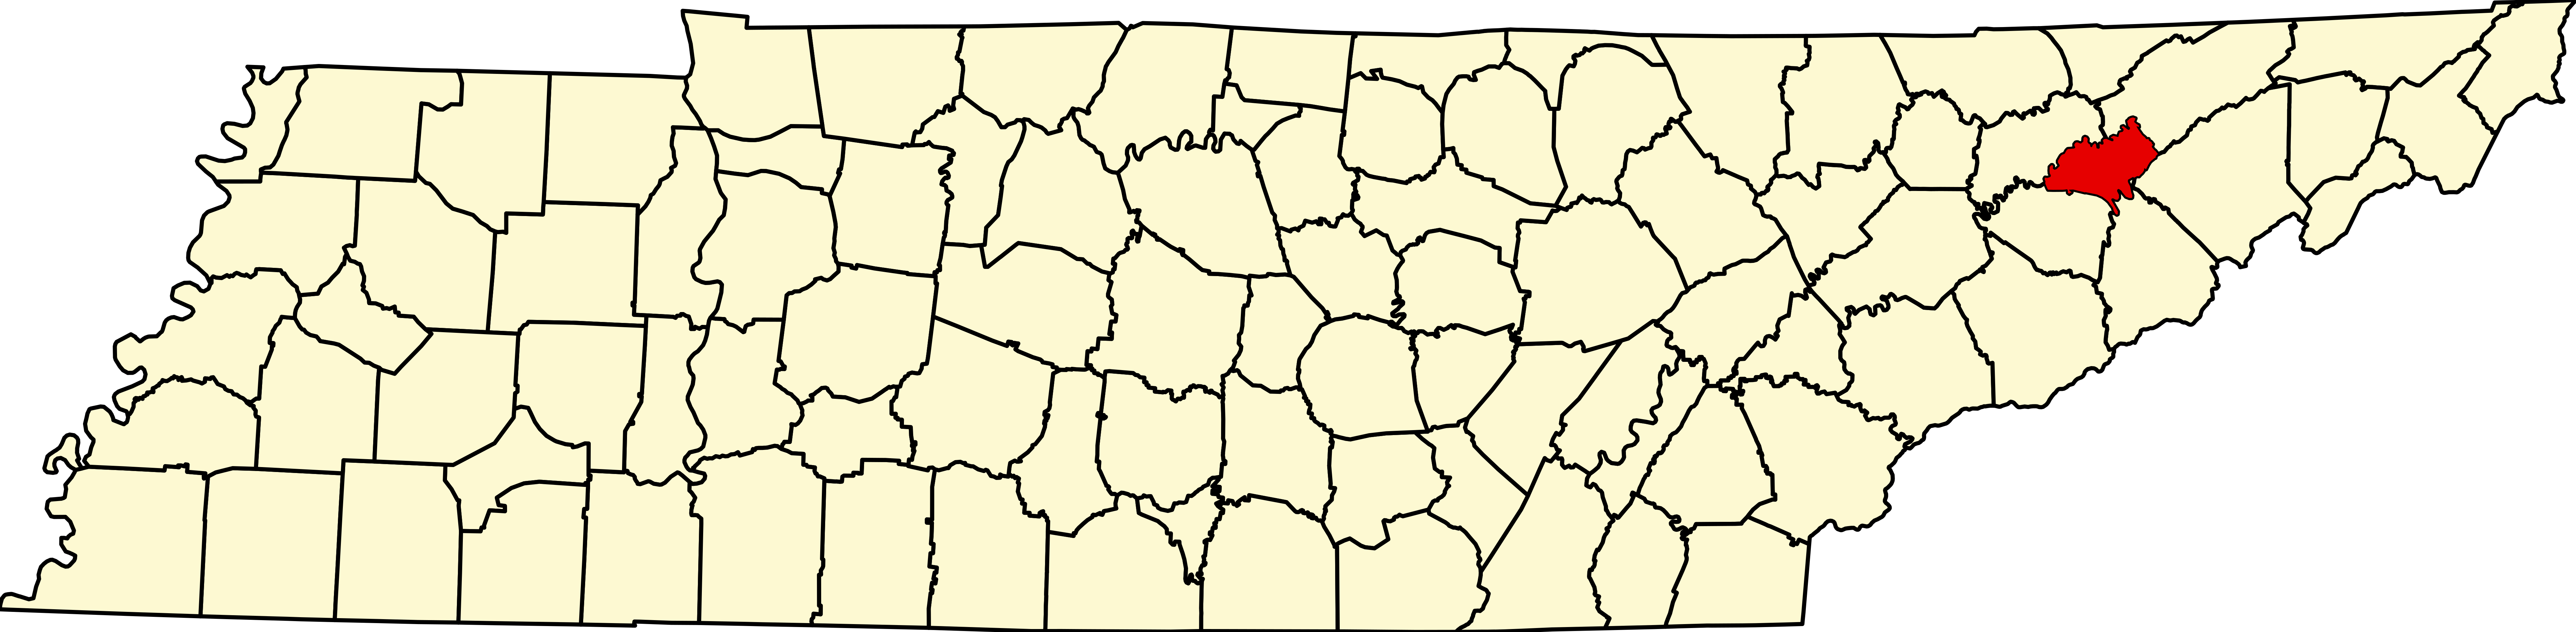 upload.wikimedia.org/wikipedia/commons/thumb/9/9b/Map_of_Tennessee_highlighting_Hamblen_County.svg/7814px-Map_of_Tennessee_highlighting_Hamblen_County.svg.png